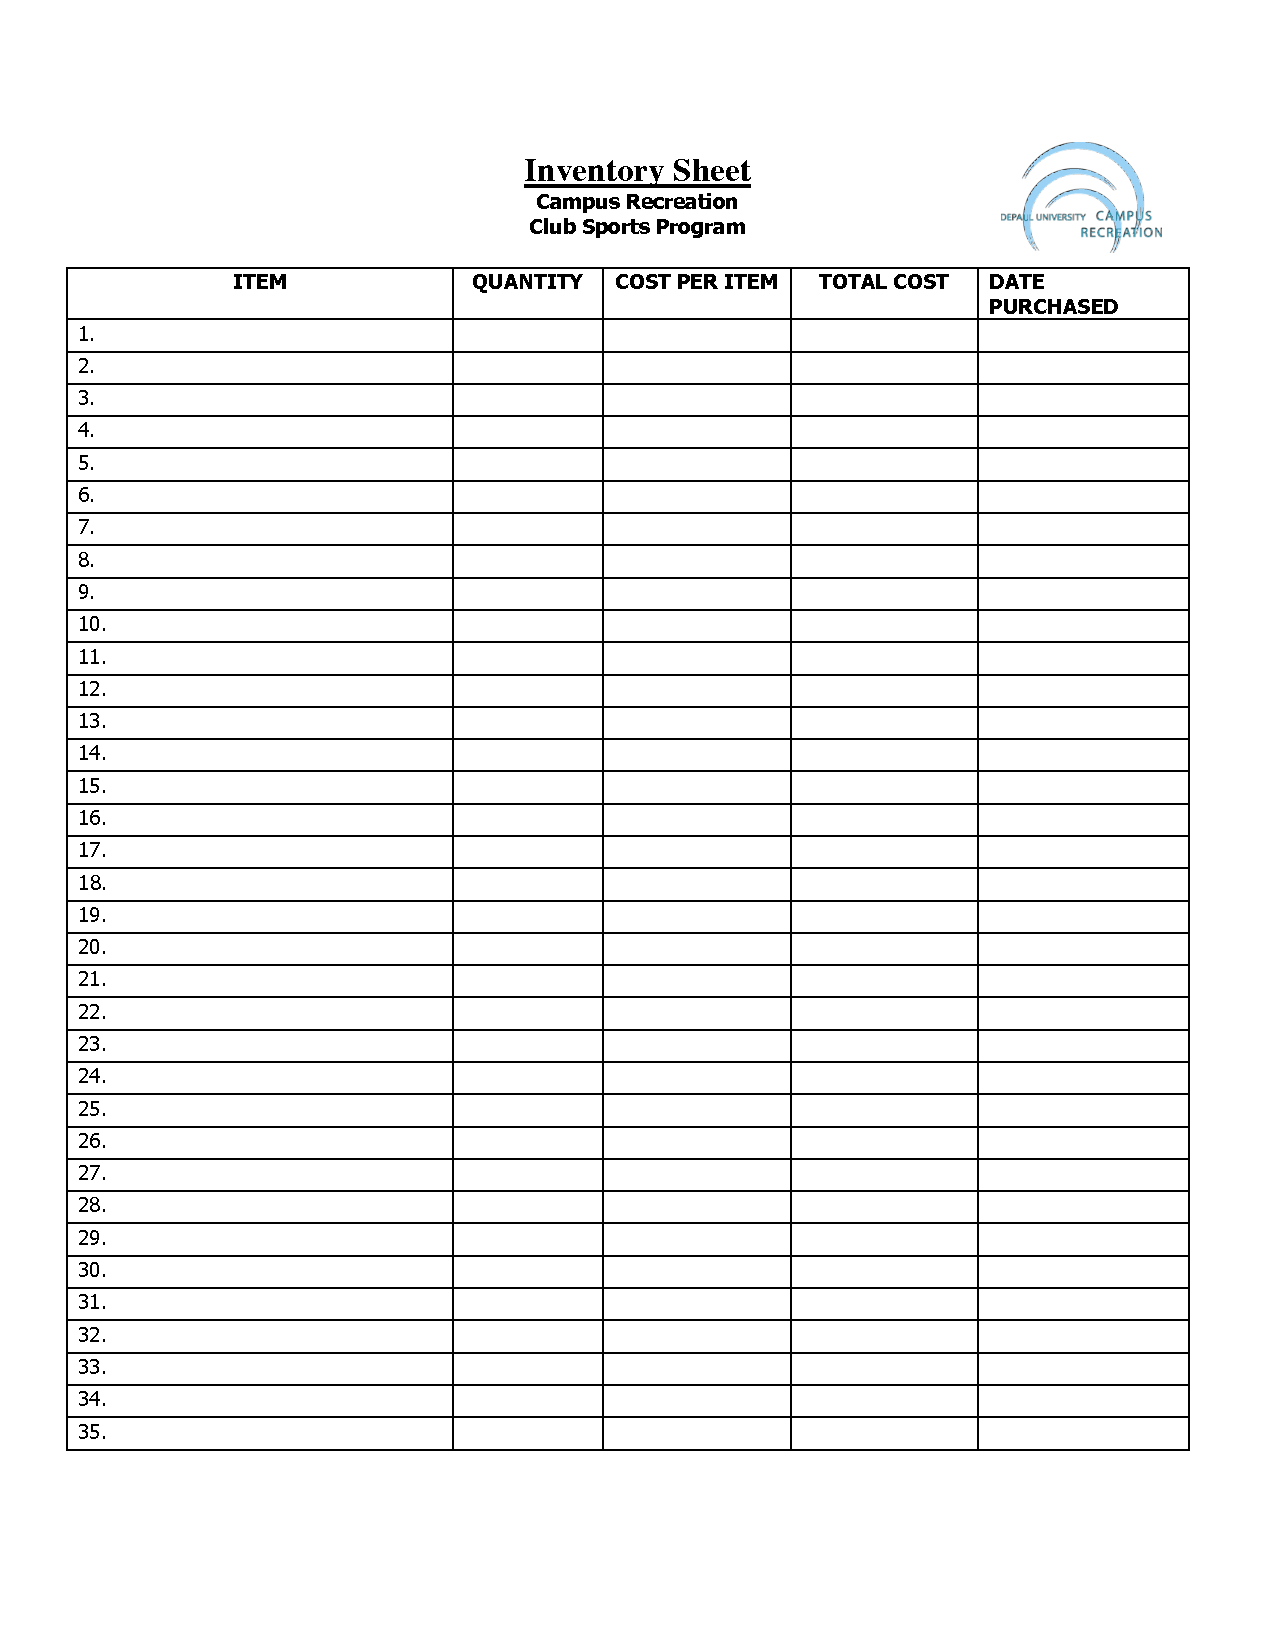 Free Printable Inventory Sheets | Inventory Sheet - Doc | Ideas - Free Printable Inventory Sheets Business